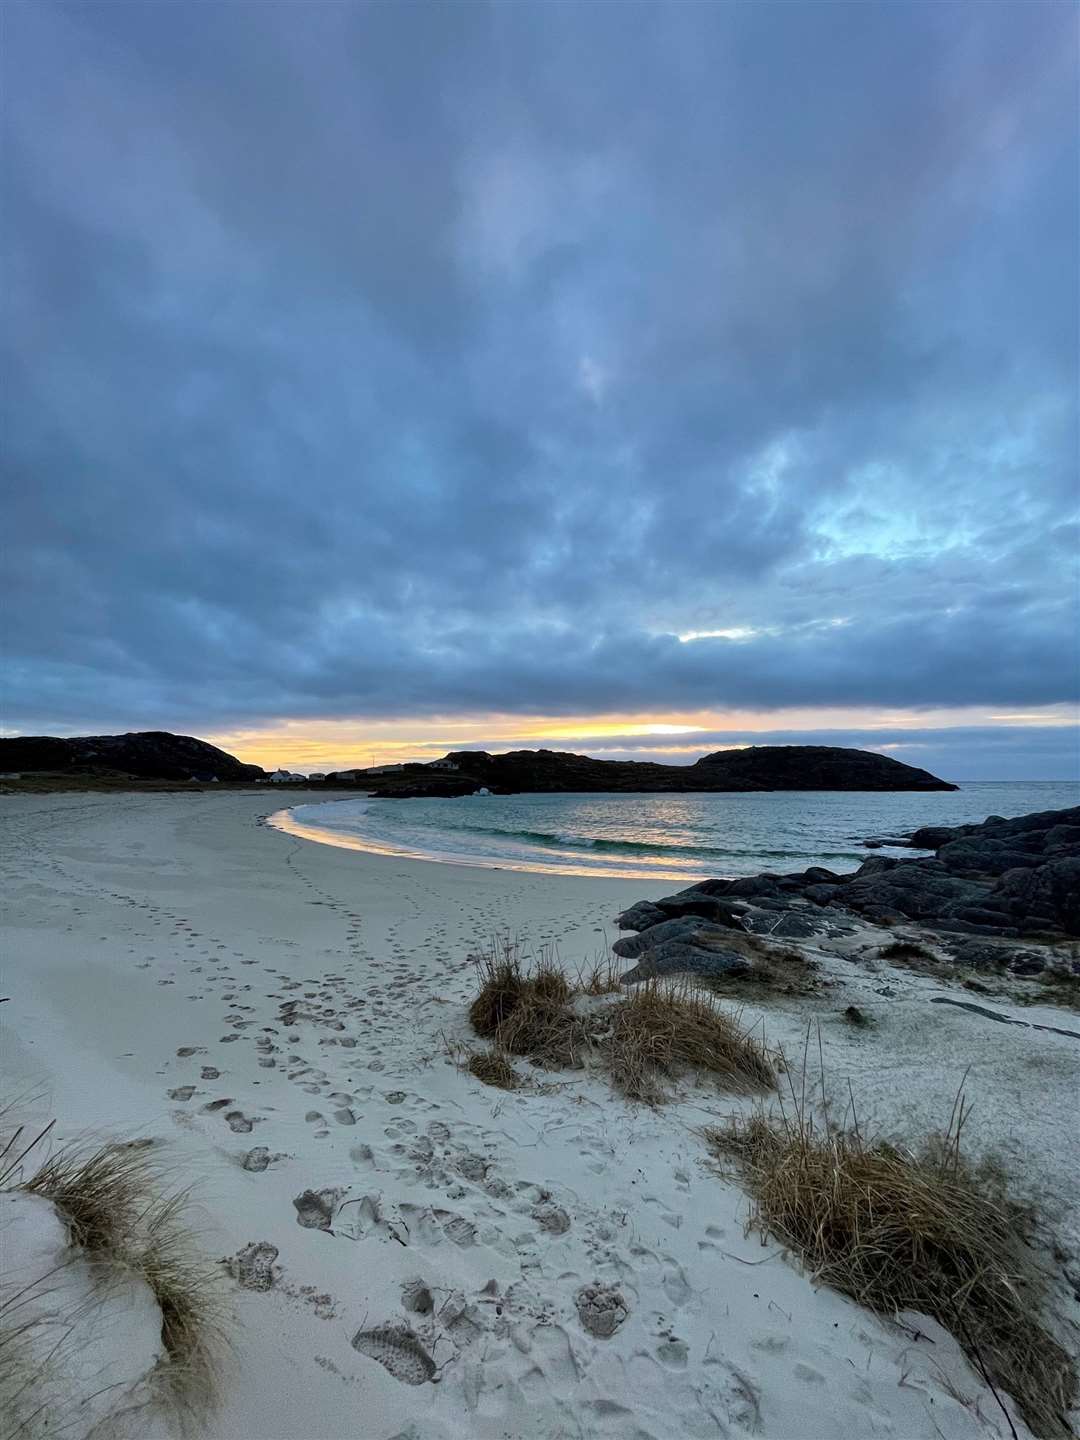 Achmelvich beach was recently shortlisted as one of the world's top 50 best beaches with features likened to a Caribbean tropical paradise.